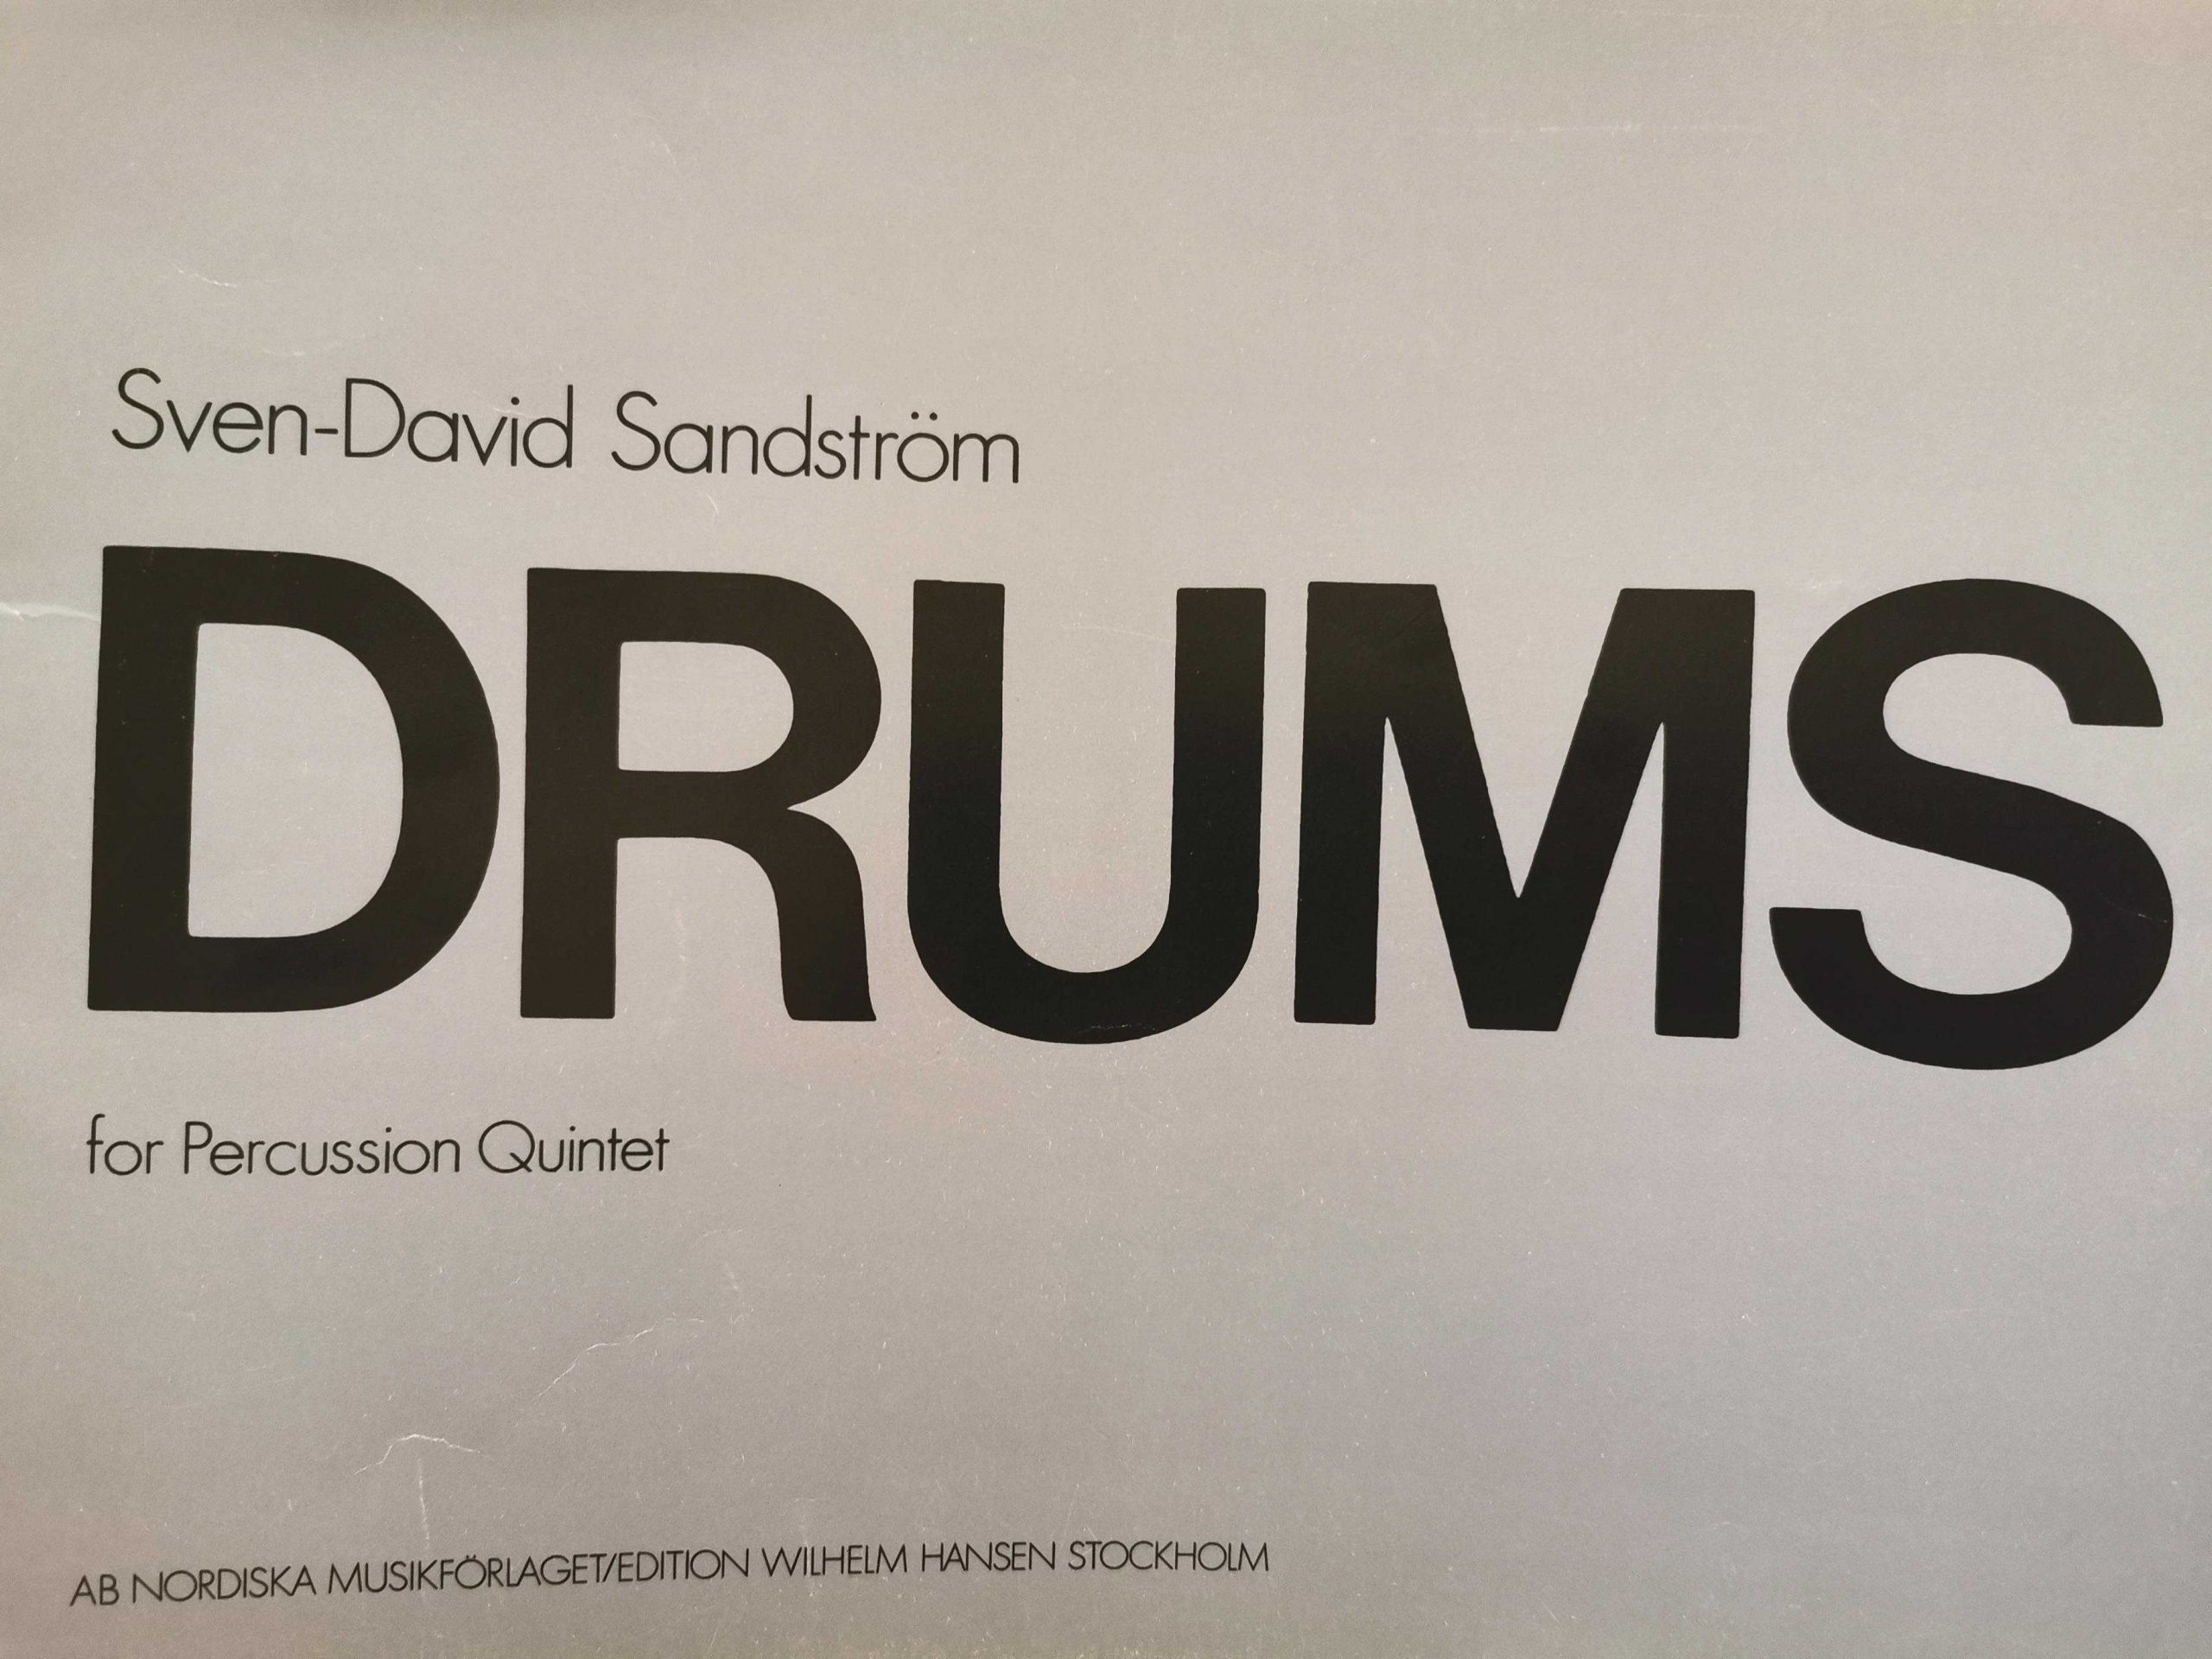 Drums for Percussion Quintet by Sven-David Sandstrom